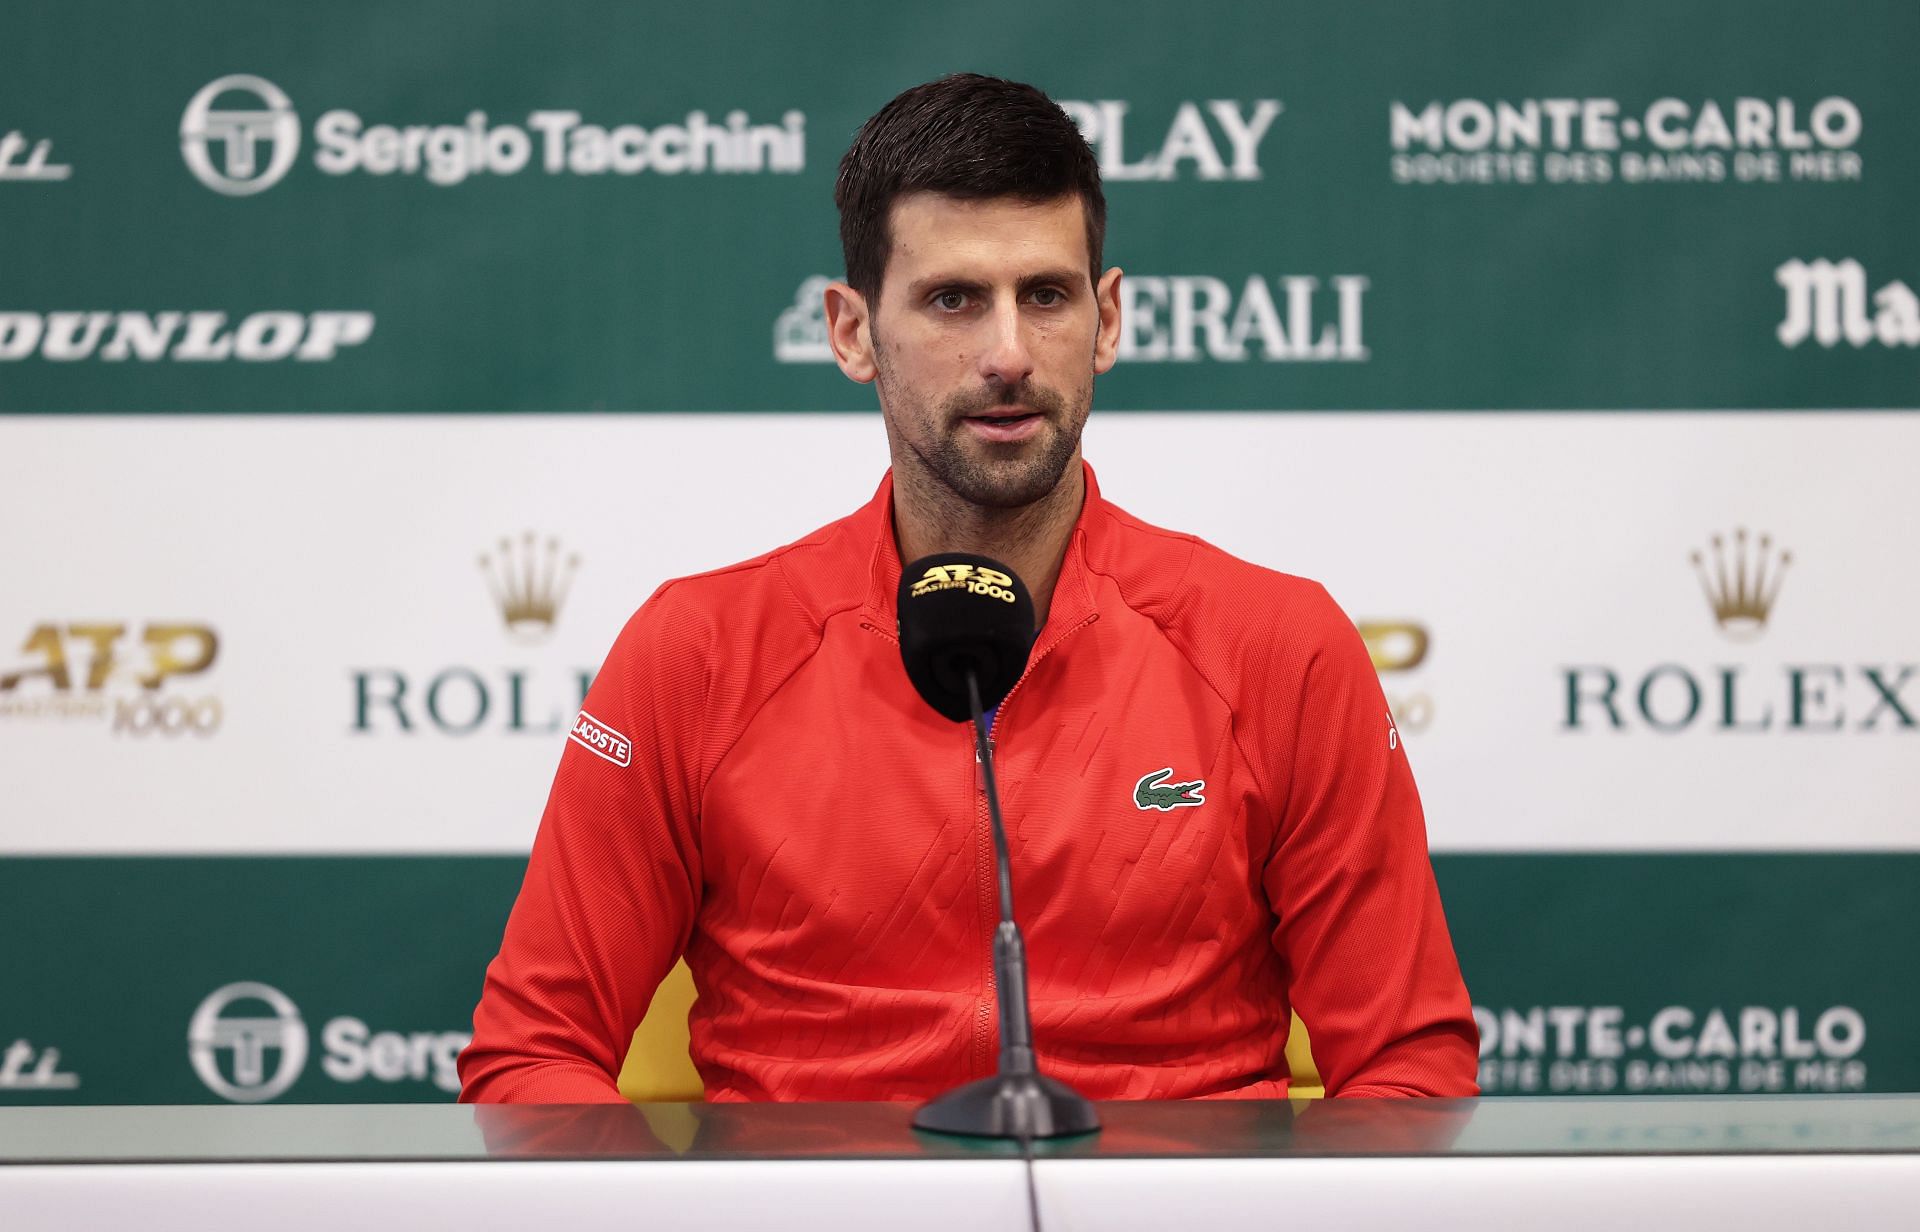 Novak Djokovic will be seen in action next at the Serbia Open